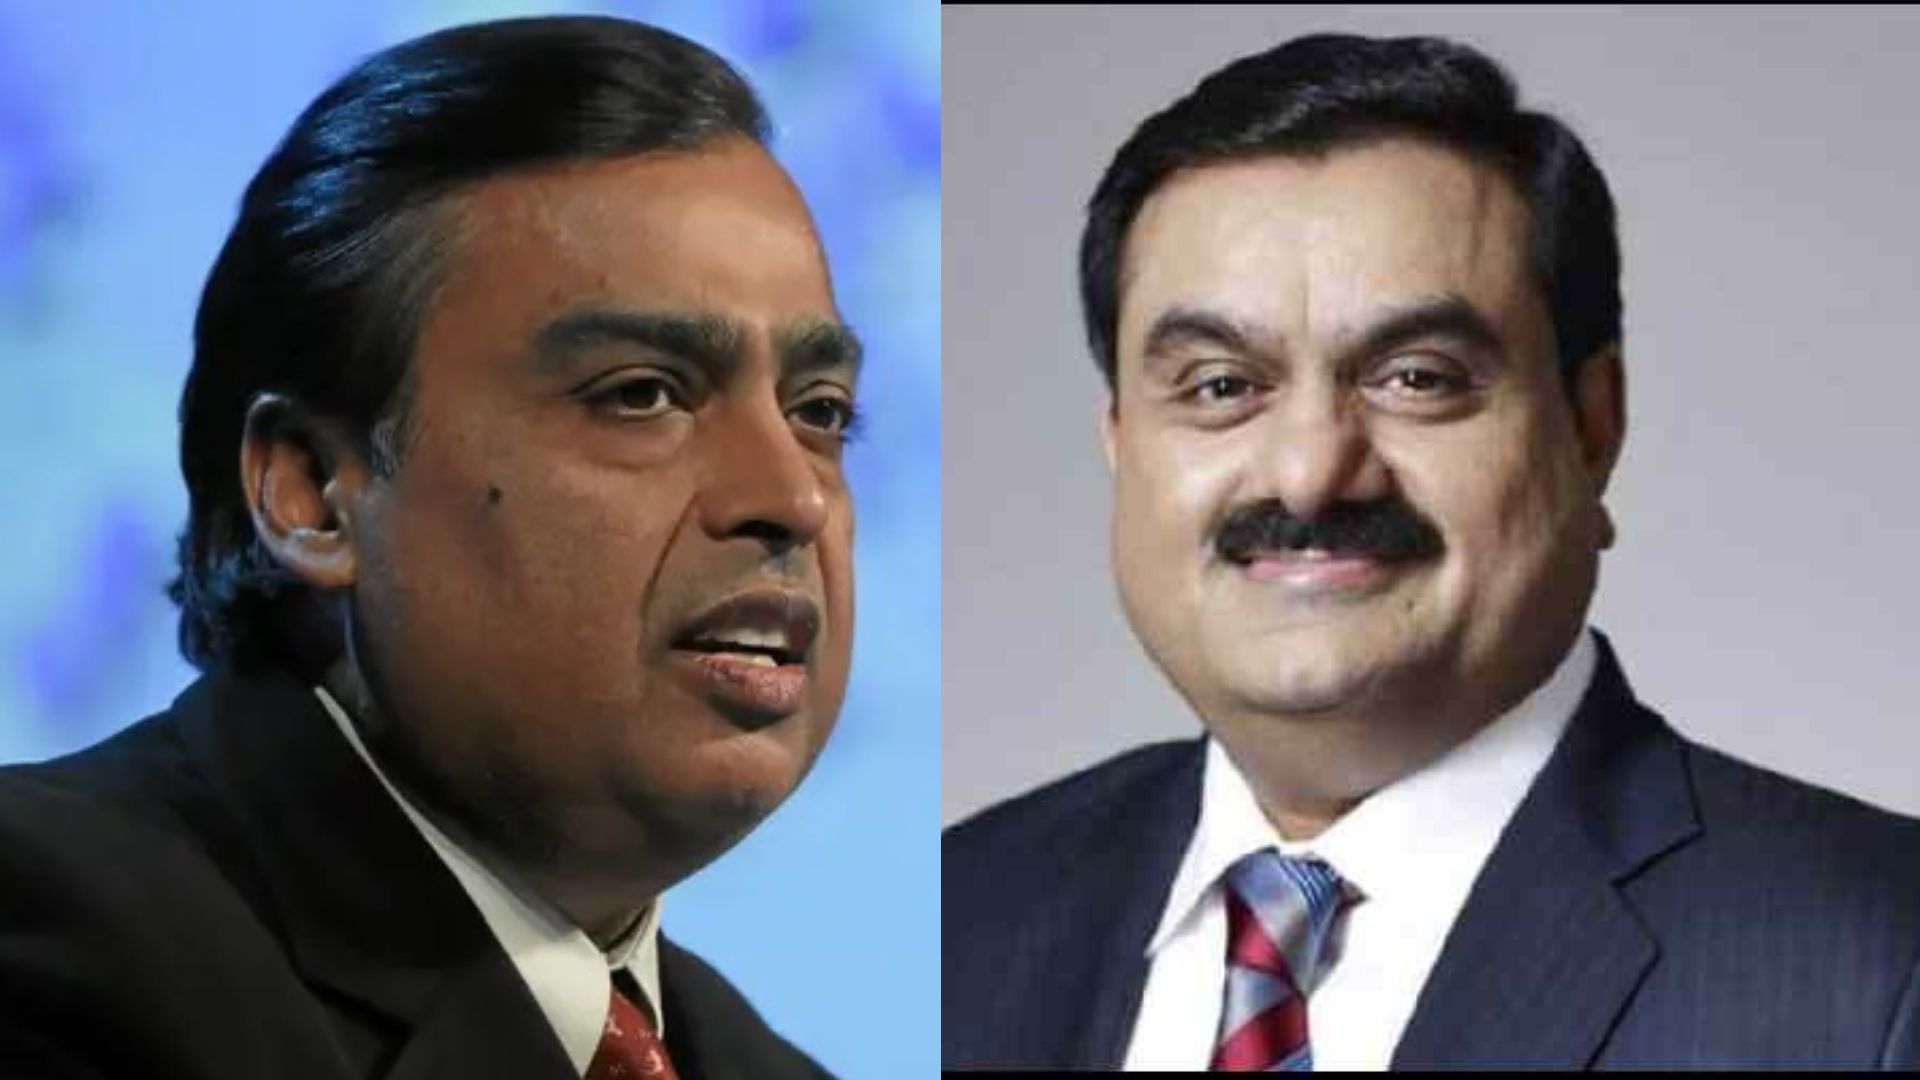 Reliance acquires 26% stake in Adani’s power project